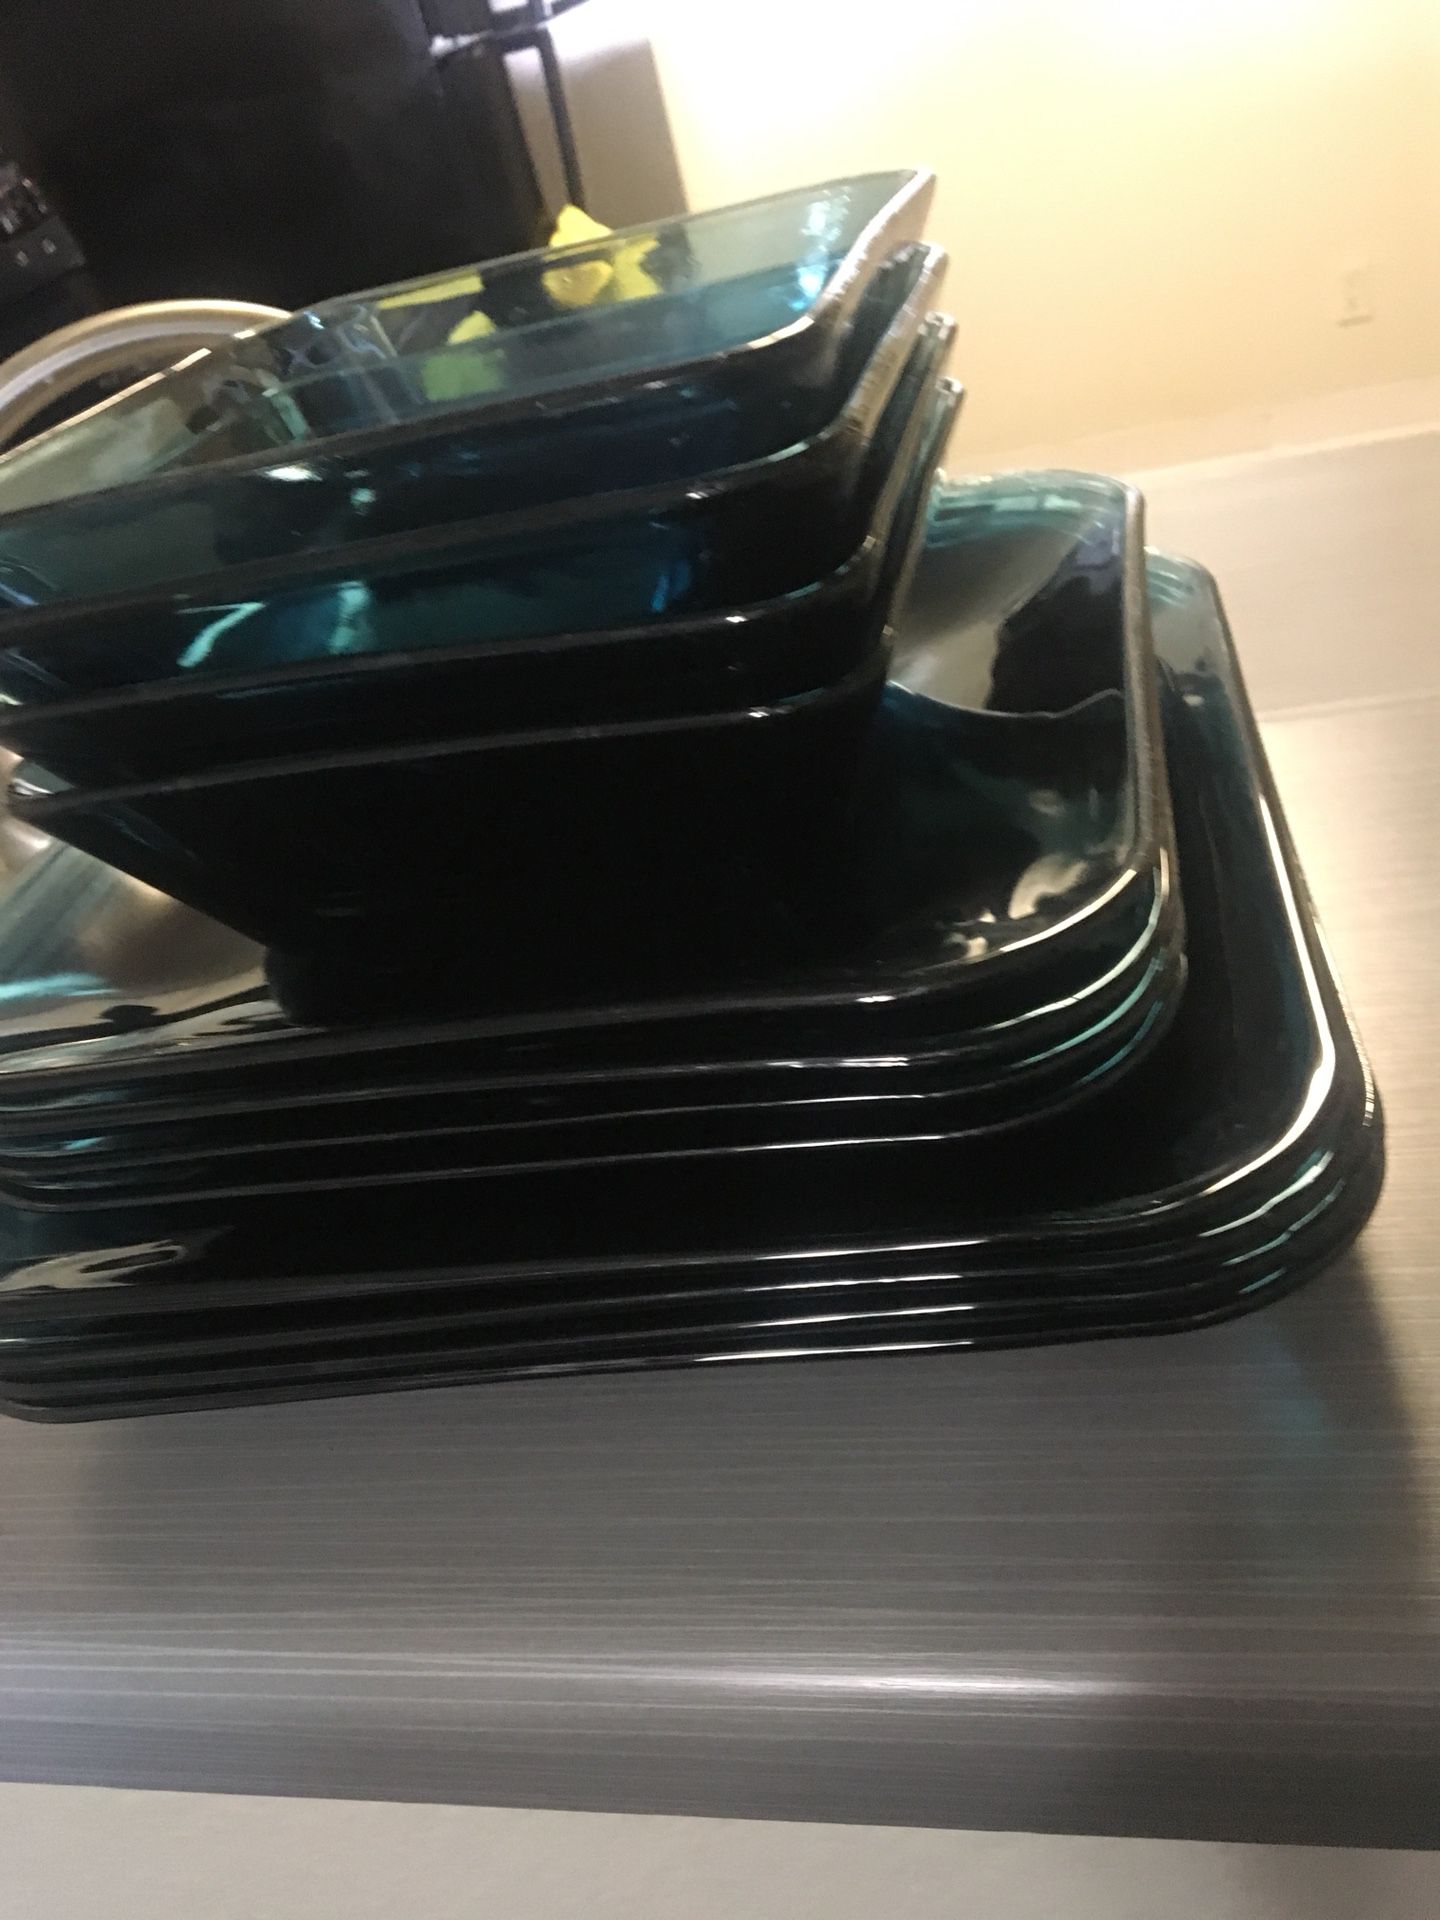 4 dining plates, 4 salad plates ,4 bowls and 3 glass cups